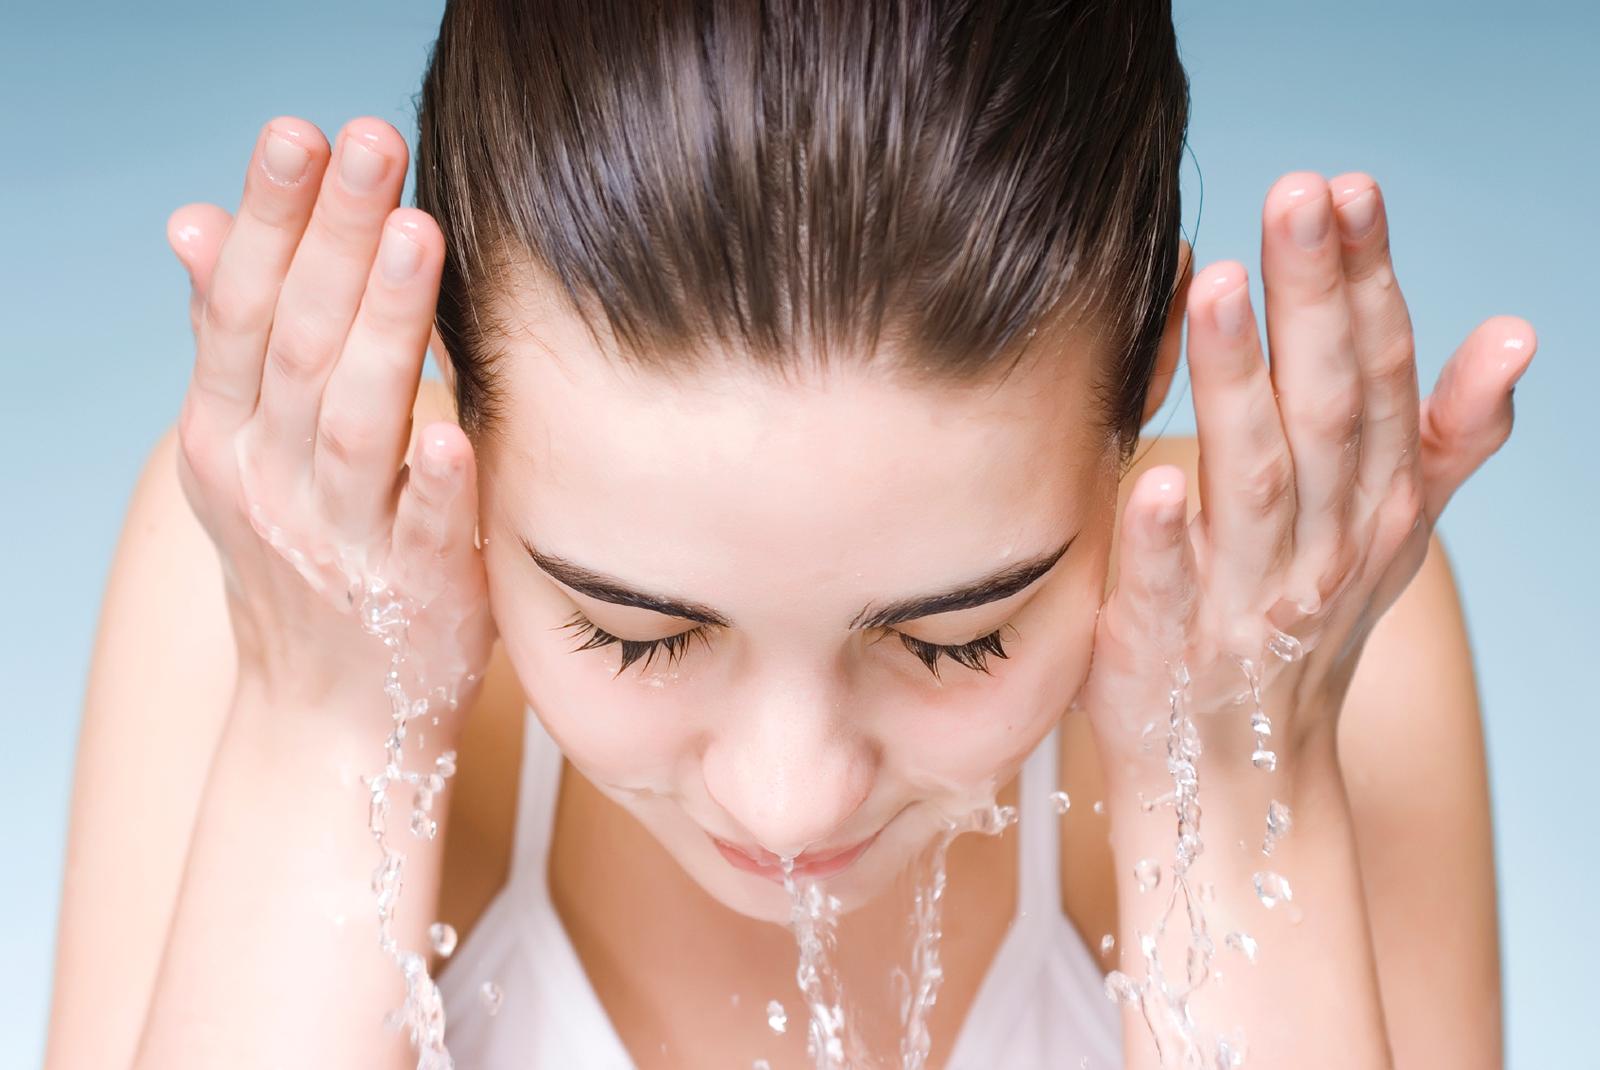 Best, Expert, Tips, Techniques, How, To, Correctly, Properly, Wash, And, Cleanse, Your, Face